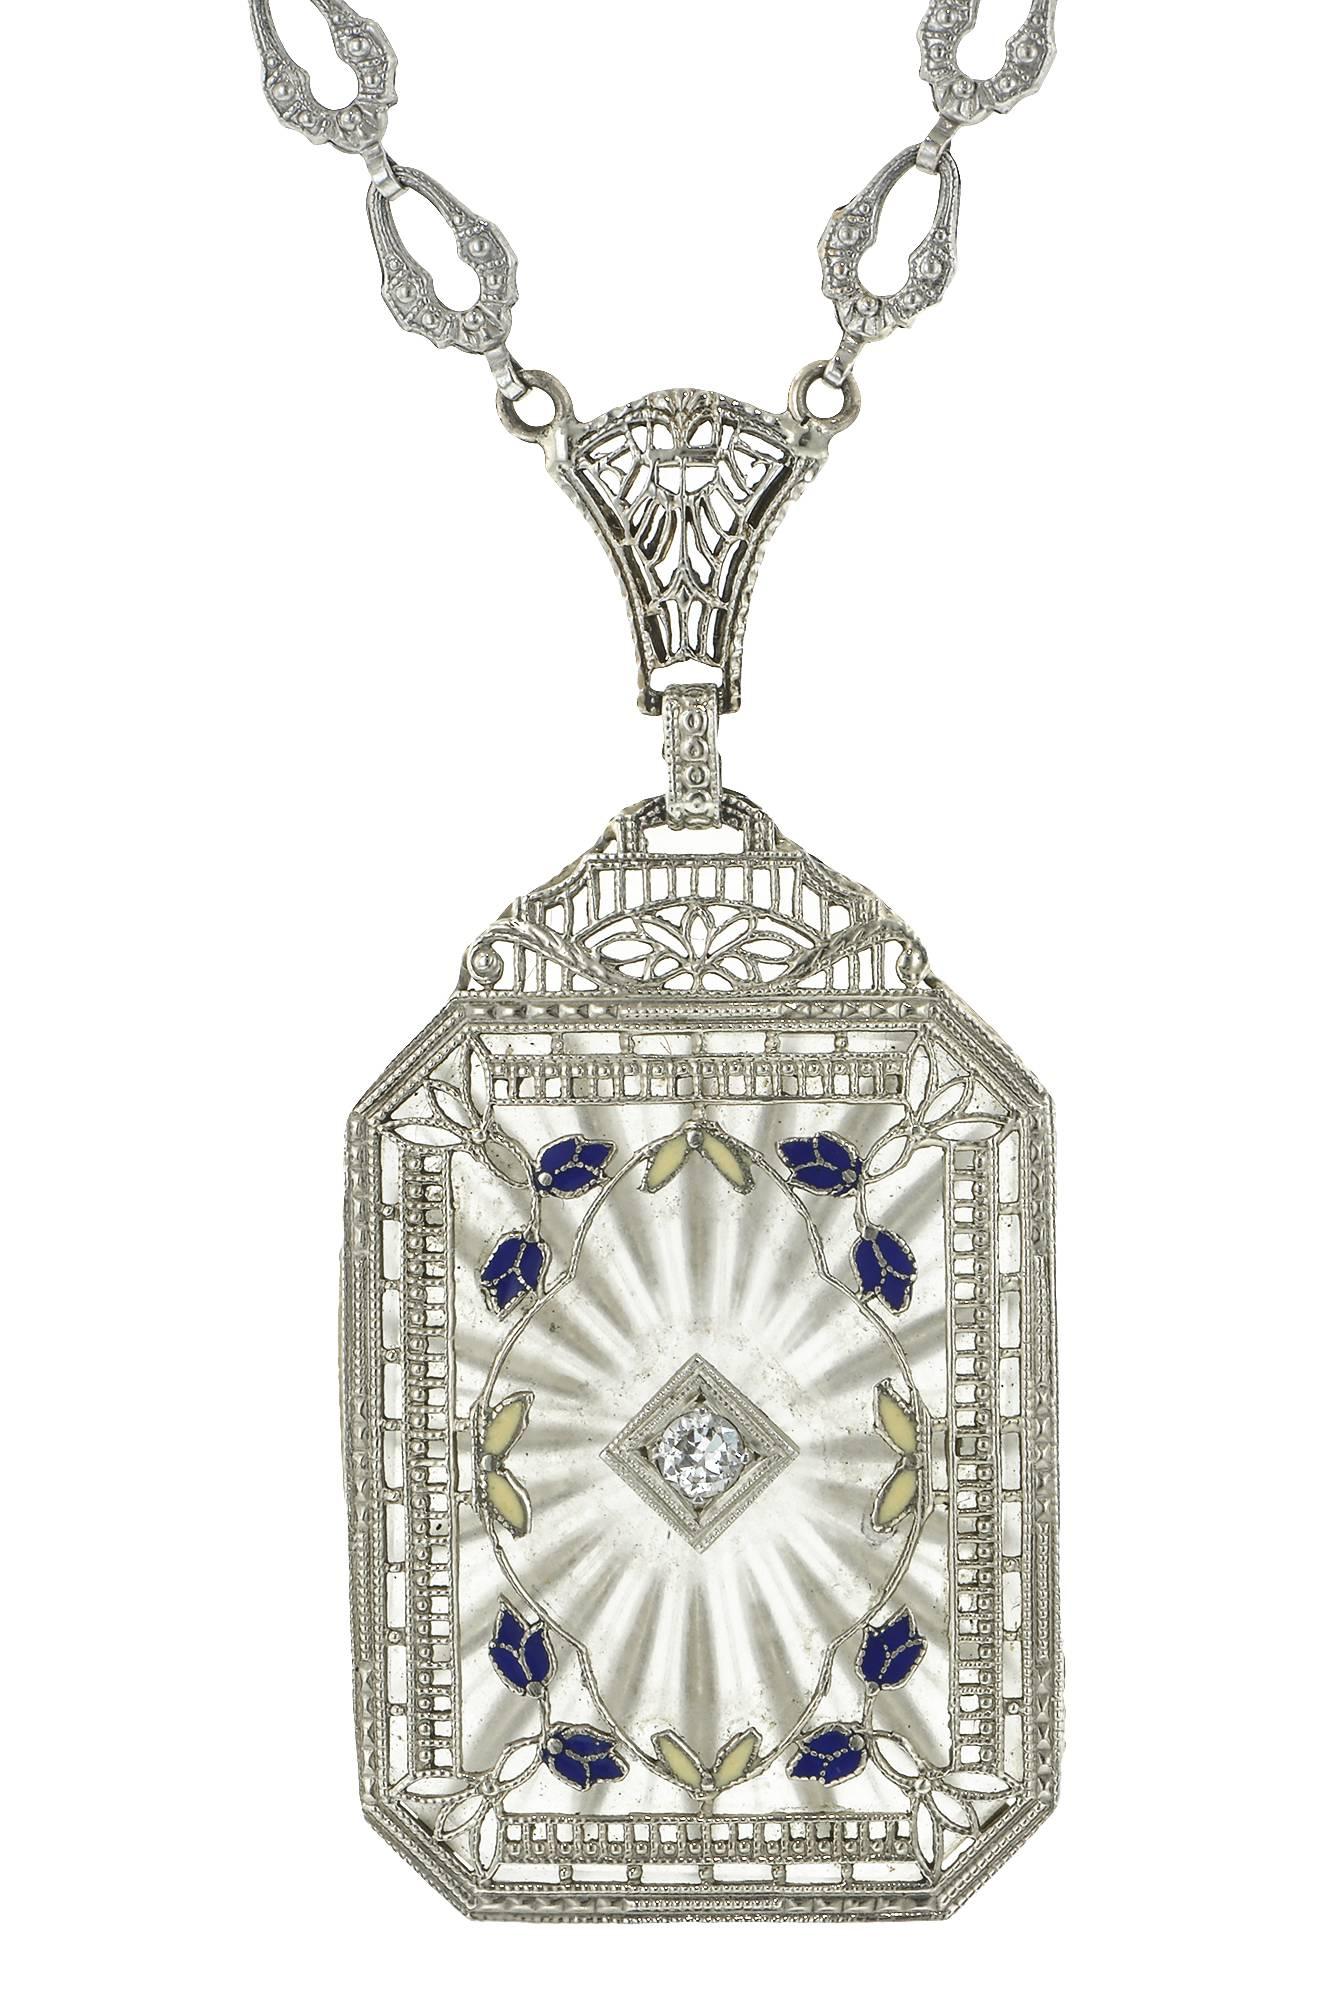 Art Deco carved rock crystal, diamond, enamel filigree necklace featuring a rectangular carved rock crystal plaque measuring 1 1/8 x 7/8 inches; reverse carved in a sunburst pattern and pierced in the center with a bead set Transitional Round